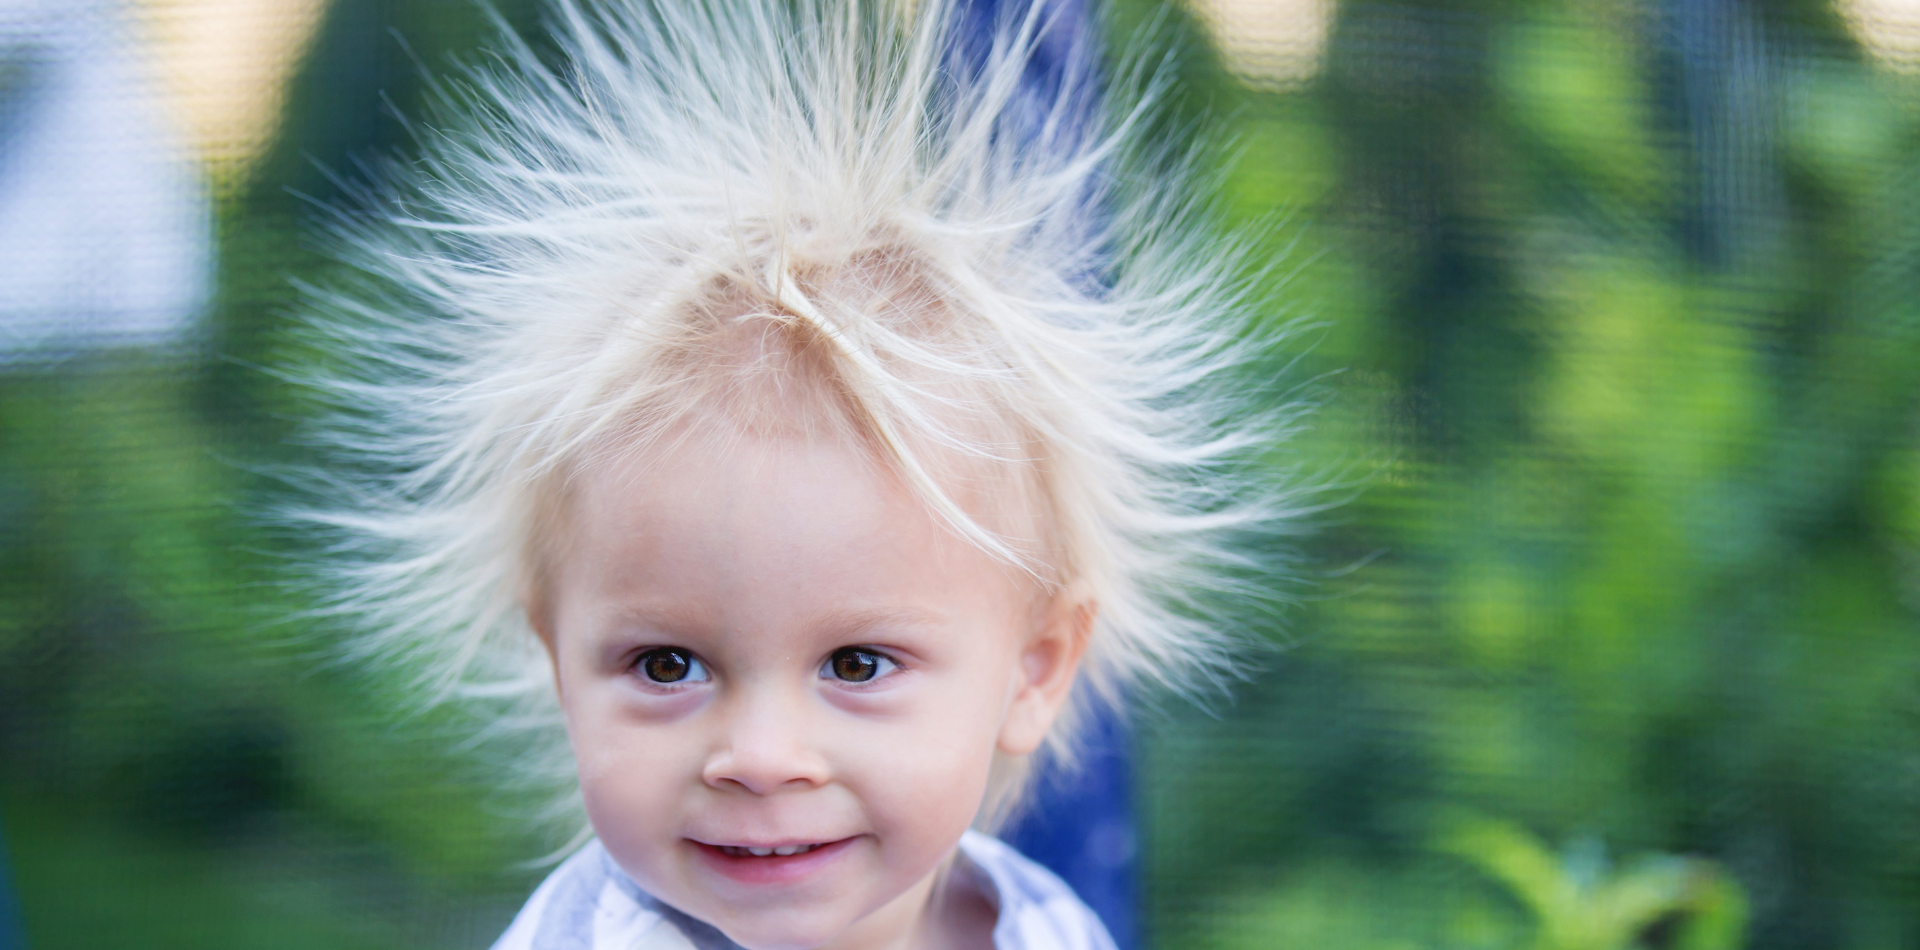 Young girl with hair standing up from static electricity